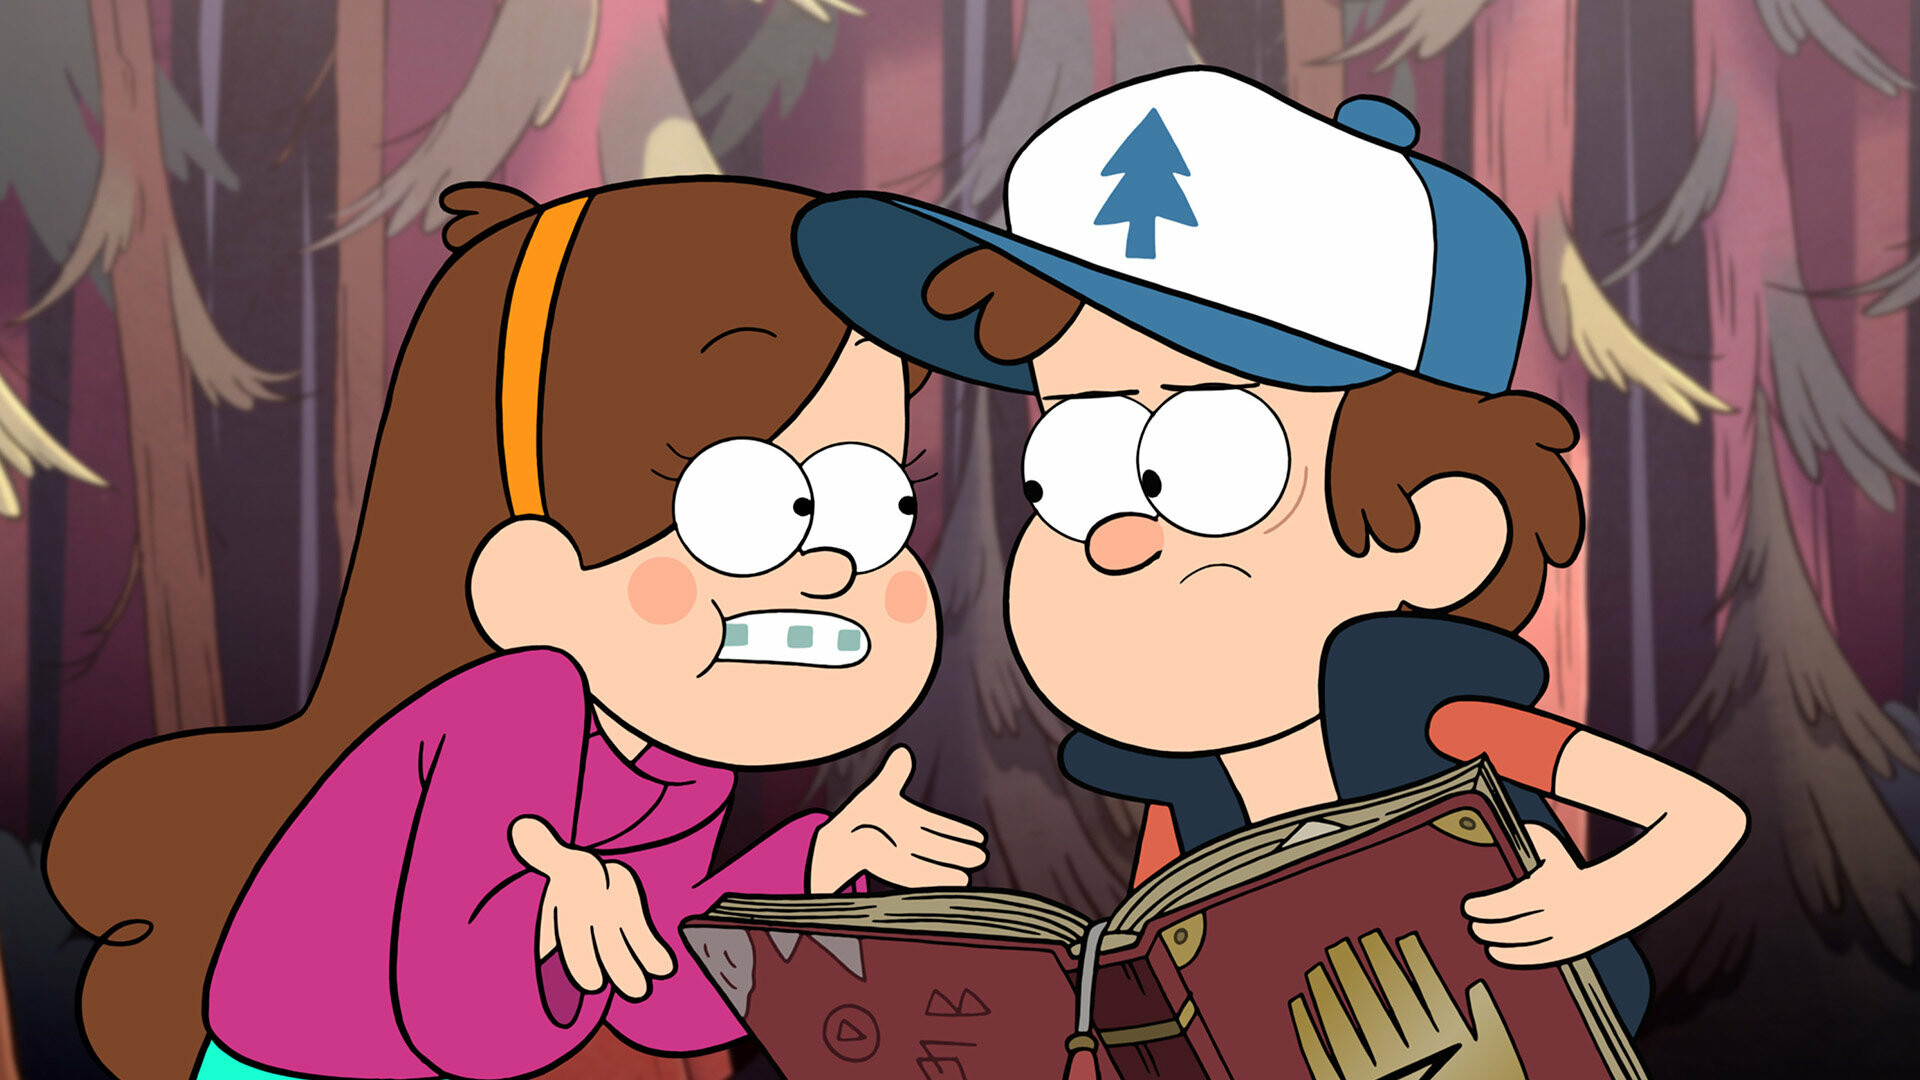 Gravity Falls: Dipper, appears in all the episodes of the series alongside Mabel Pines, his twin sister. 1920x1080 Full HD Background.